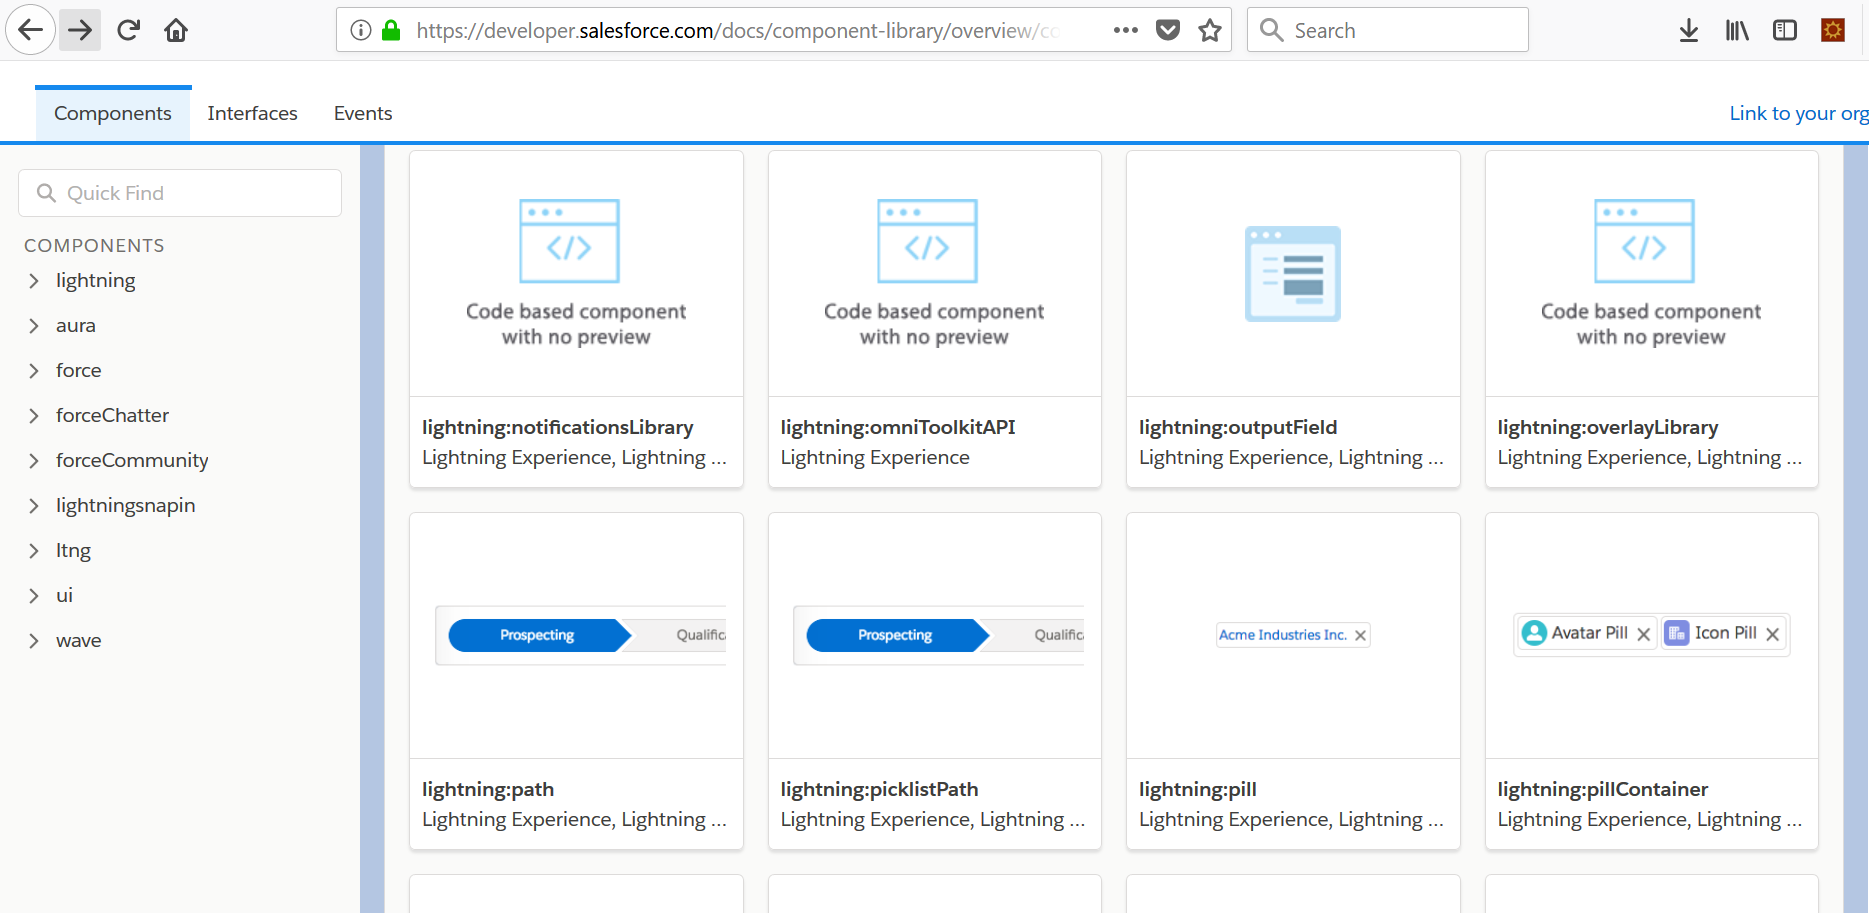 An image of  component library created by SalesForce